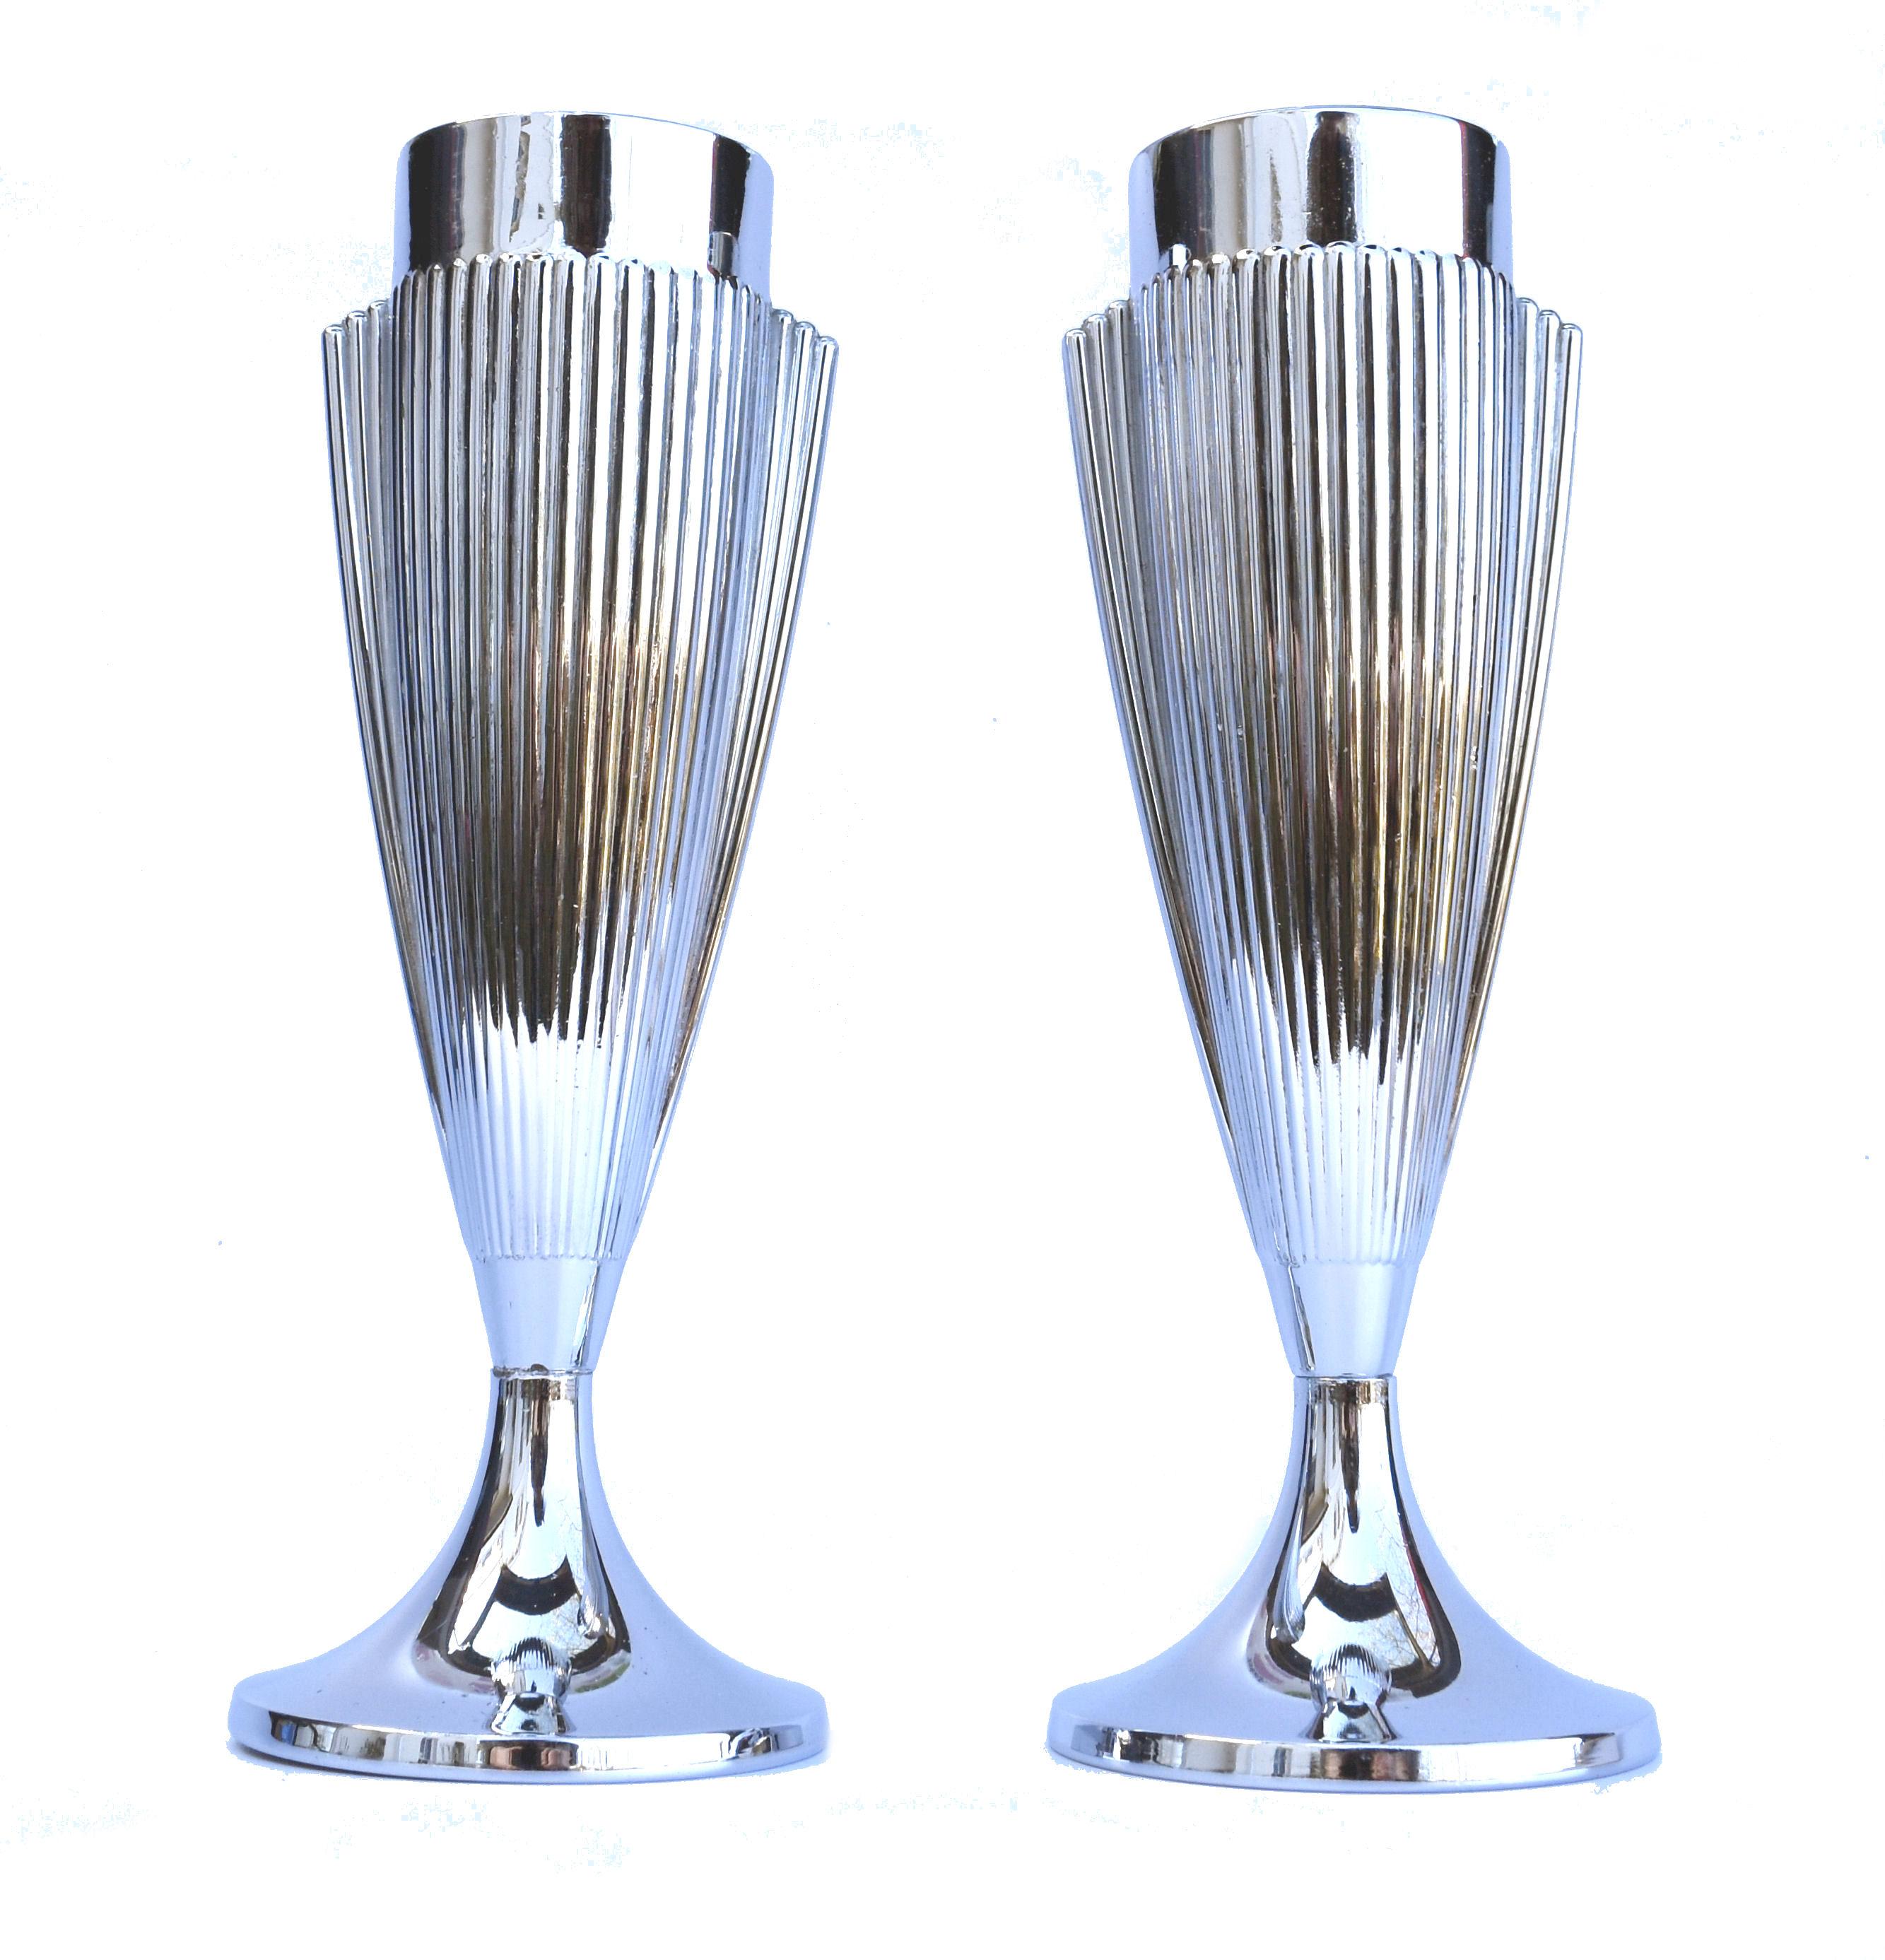 Art Deco Matching Pair of Chrome Vases, England, c1930 For Sale 3